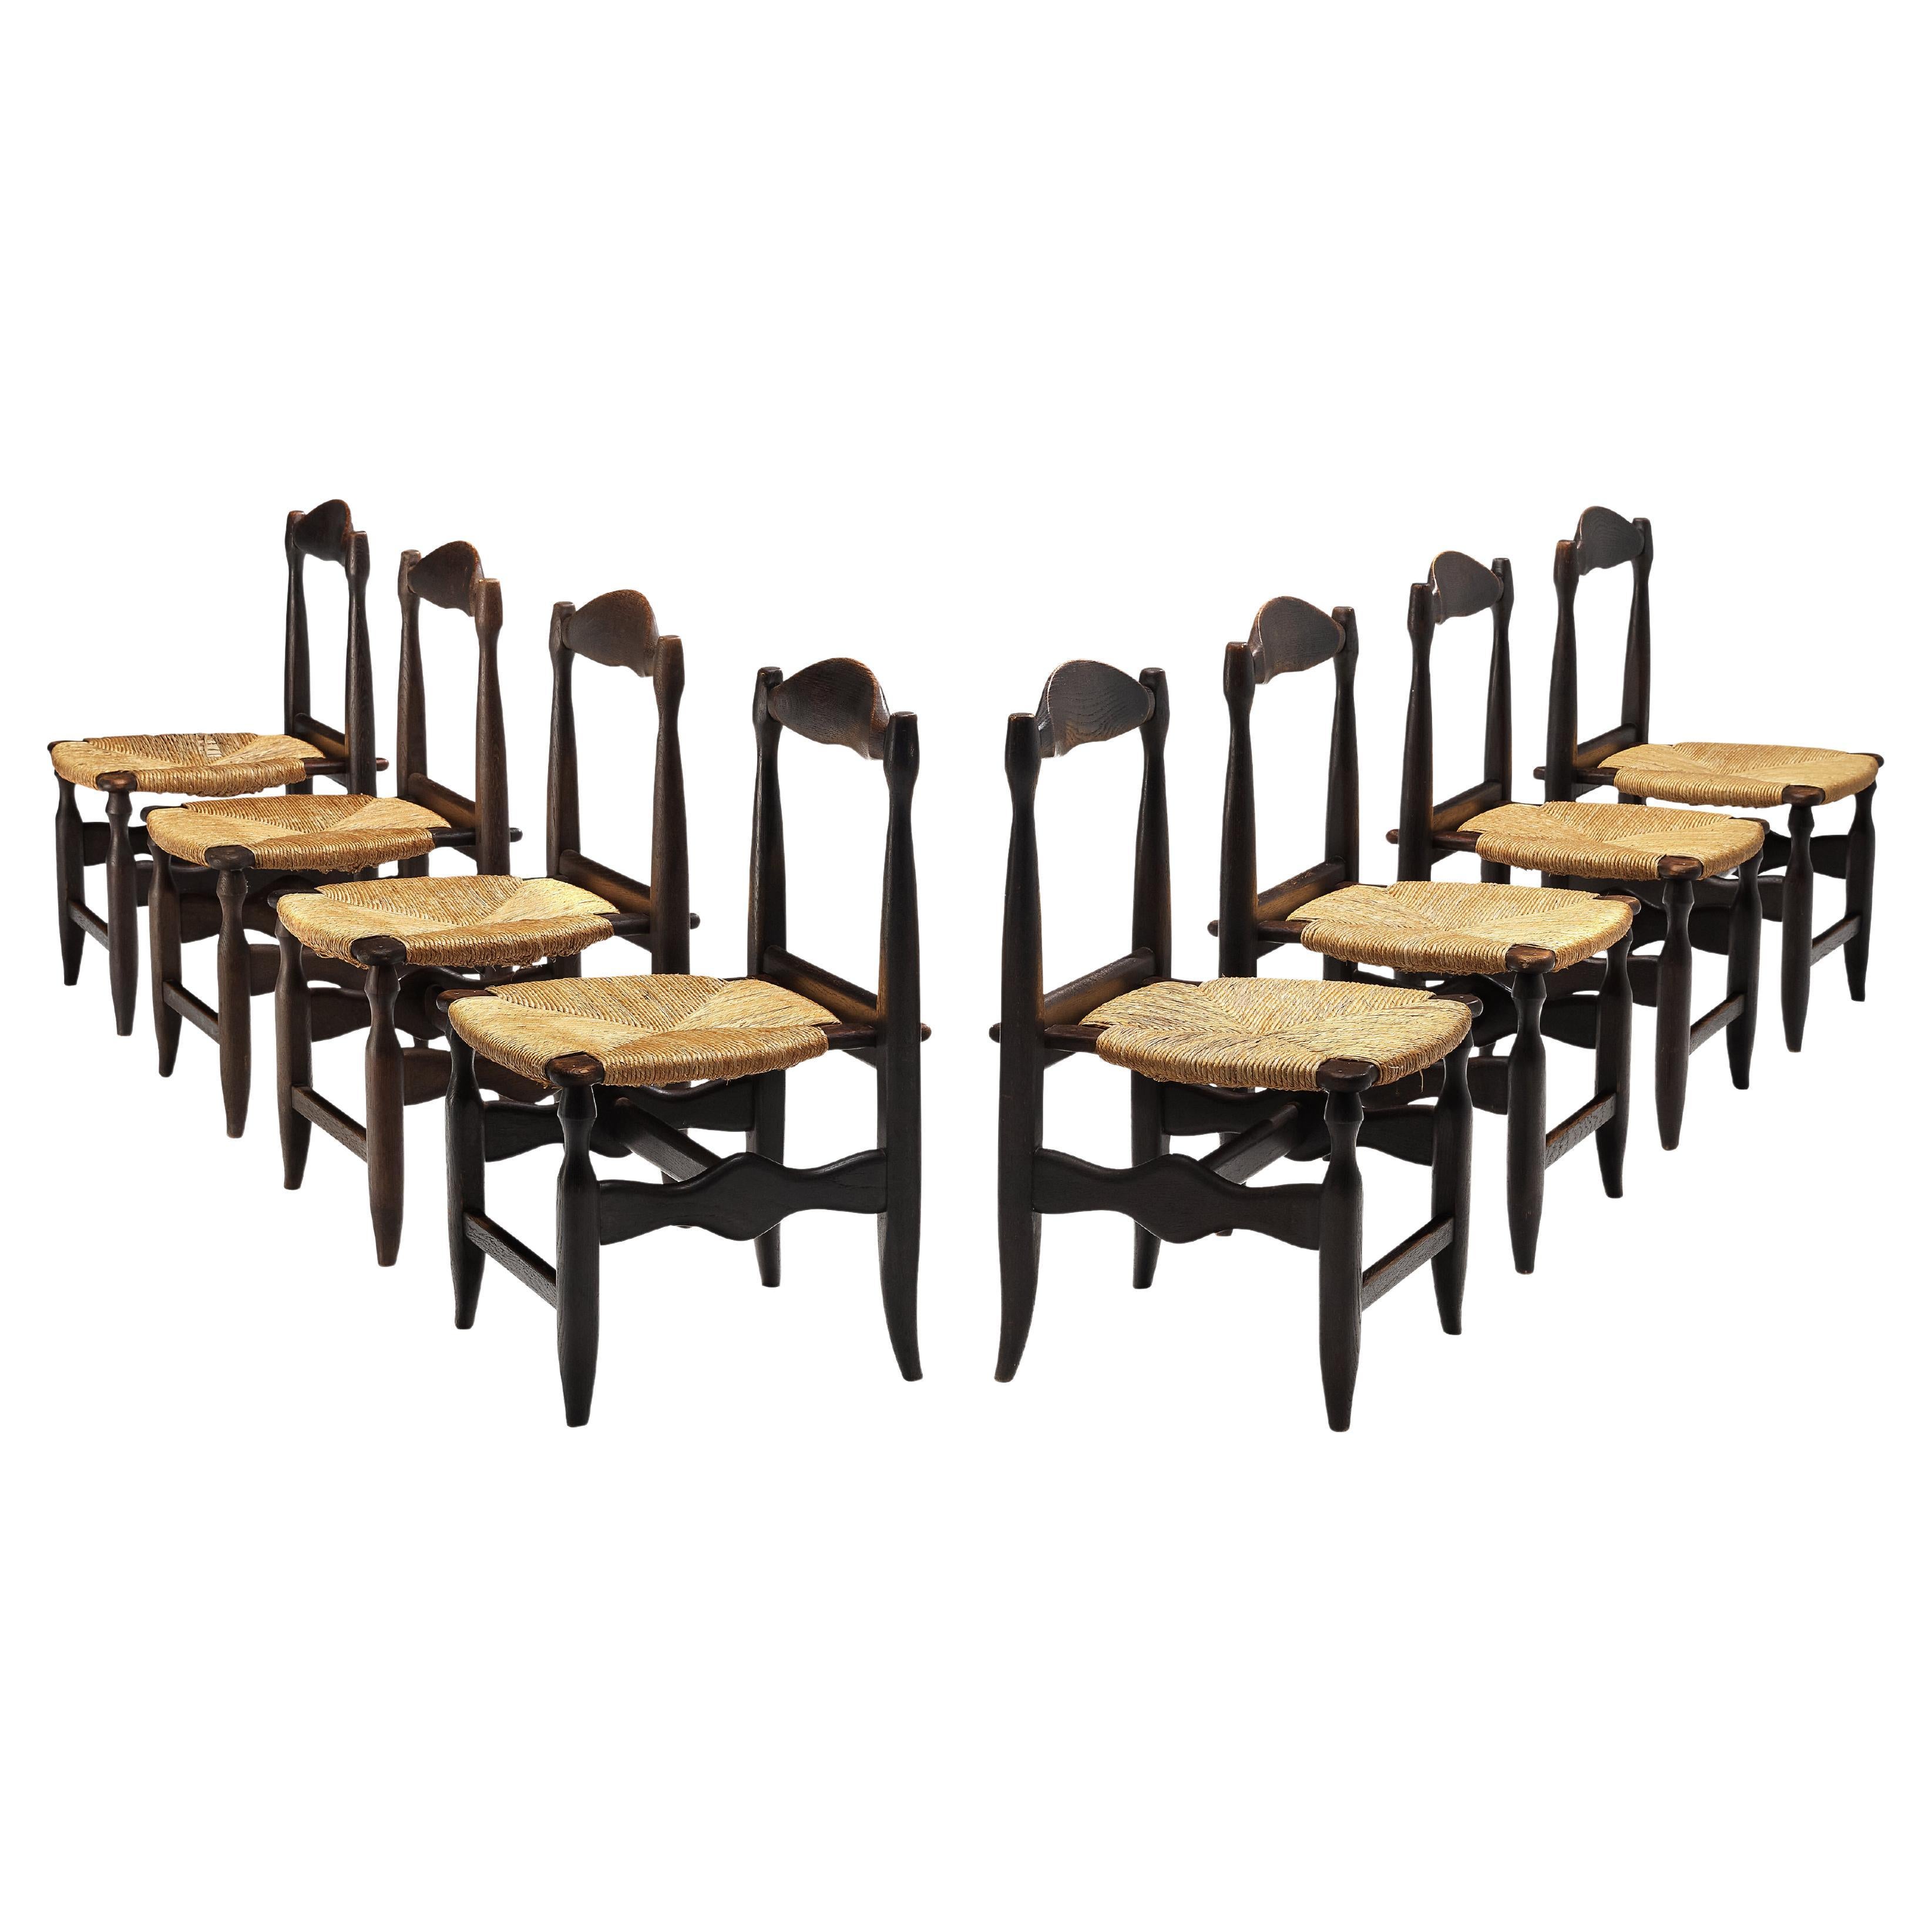 Guillerme & Chambron Set of Eight Dining Chairs in Oak and Rush